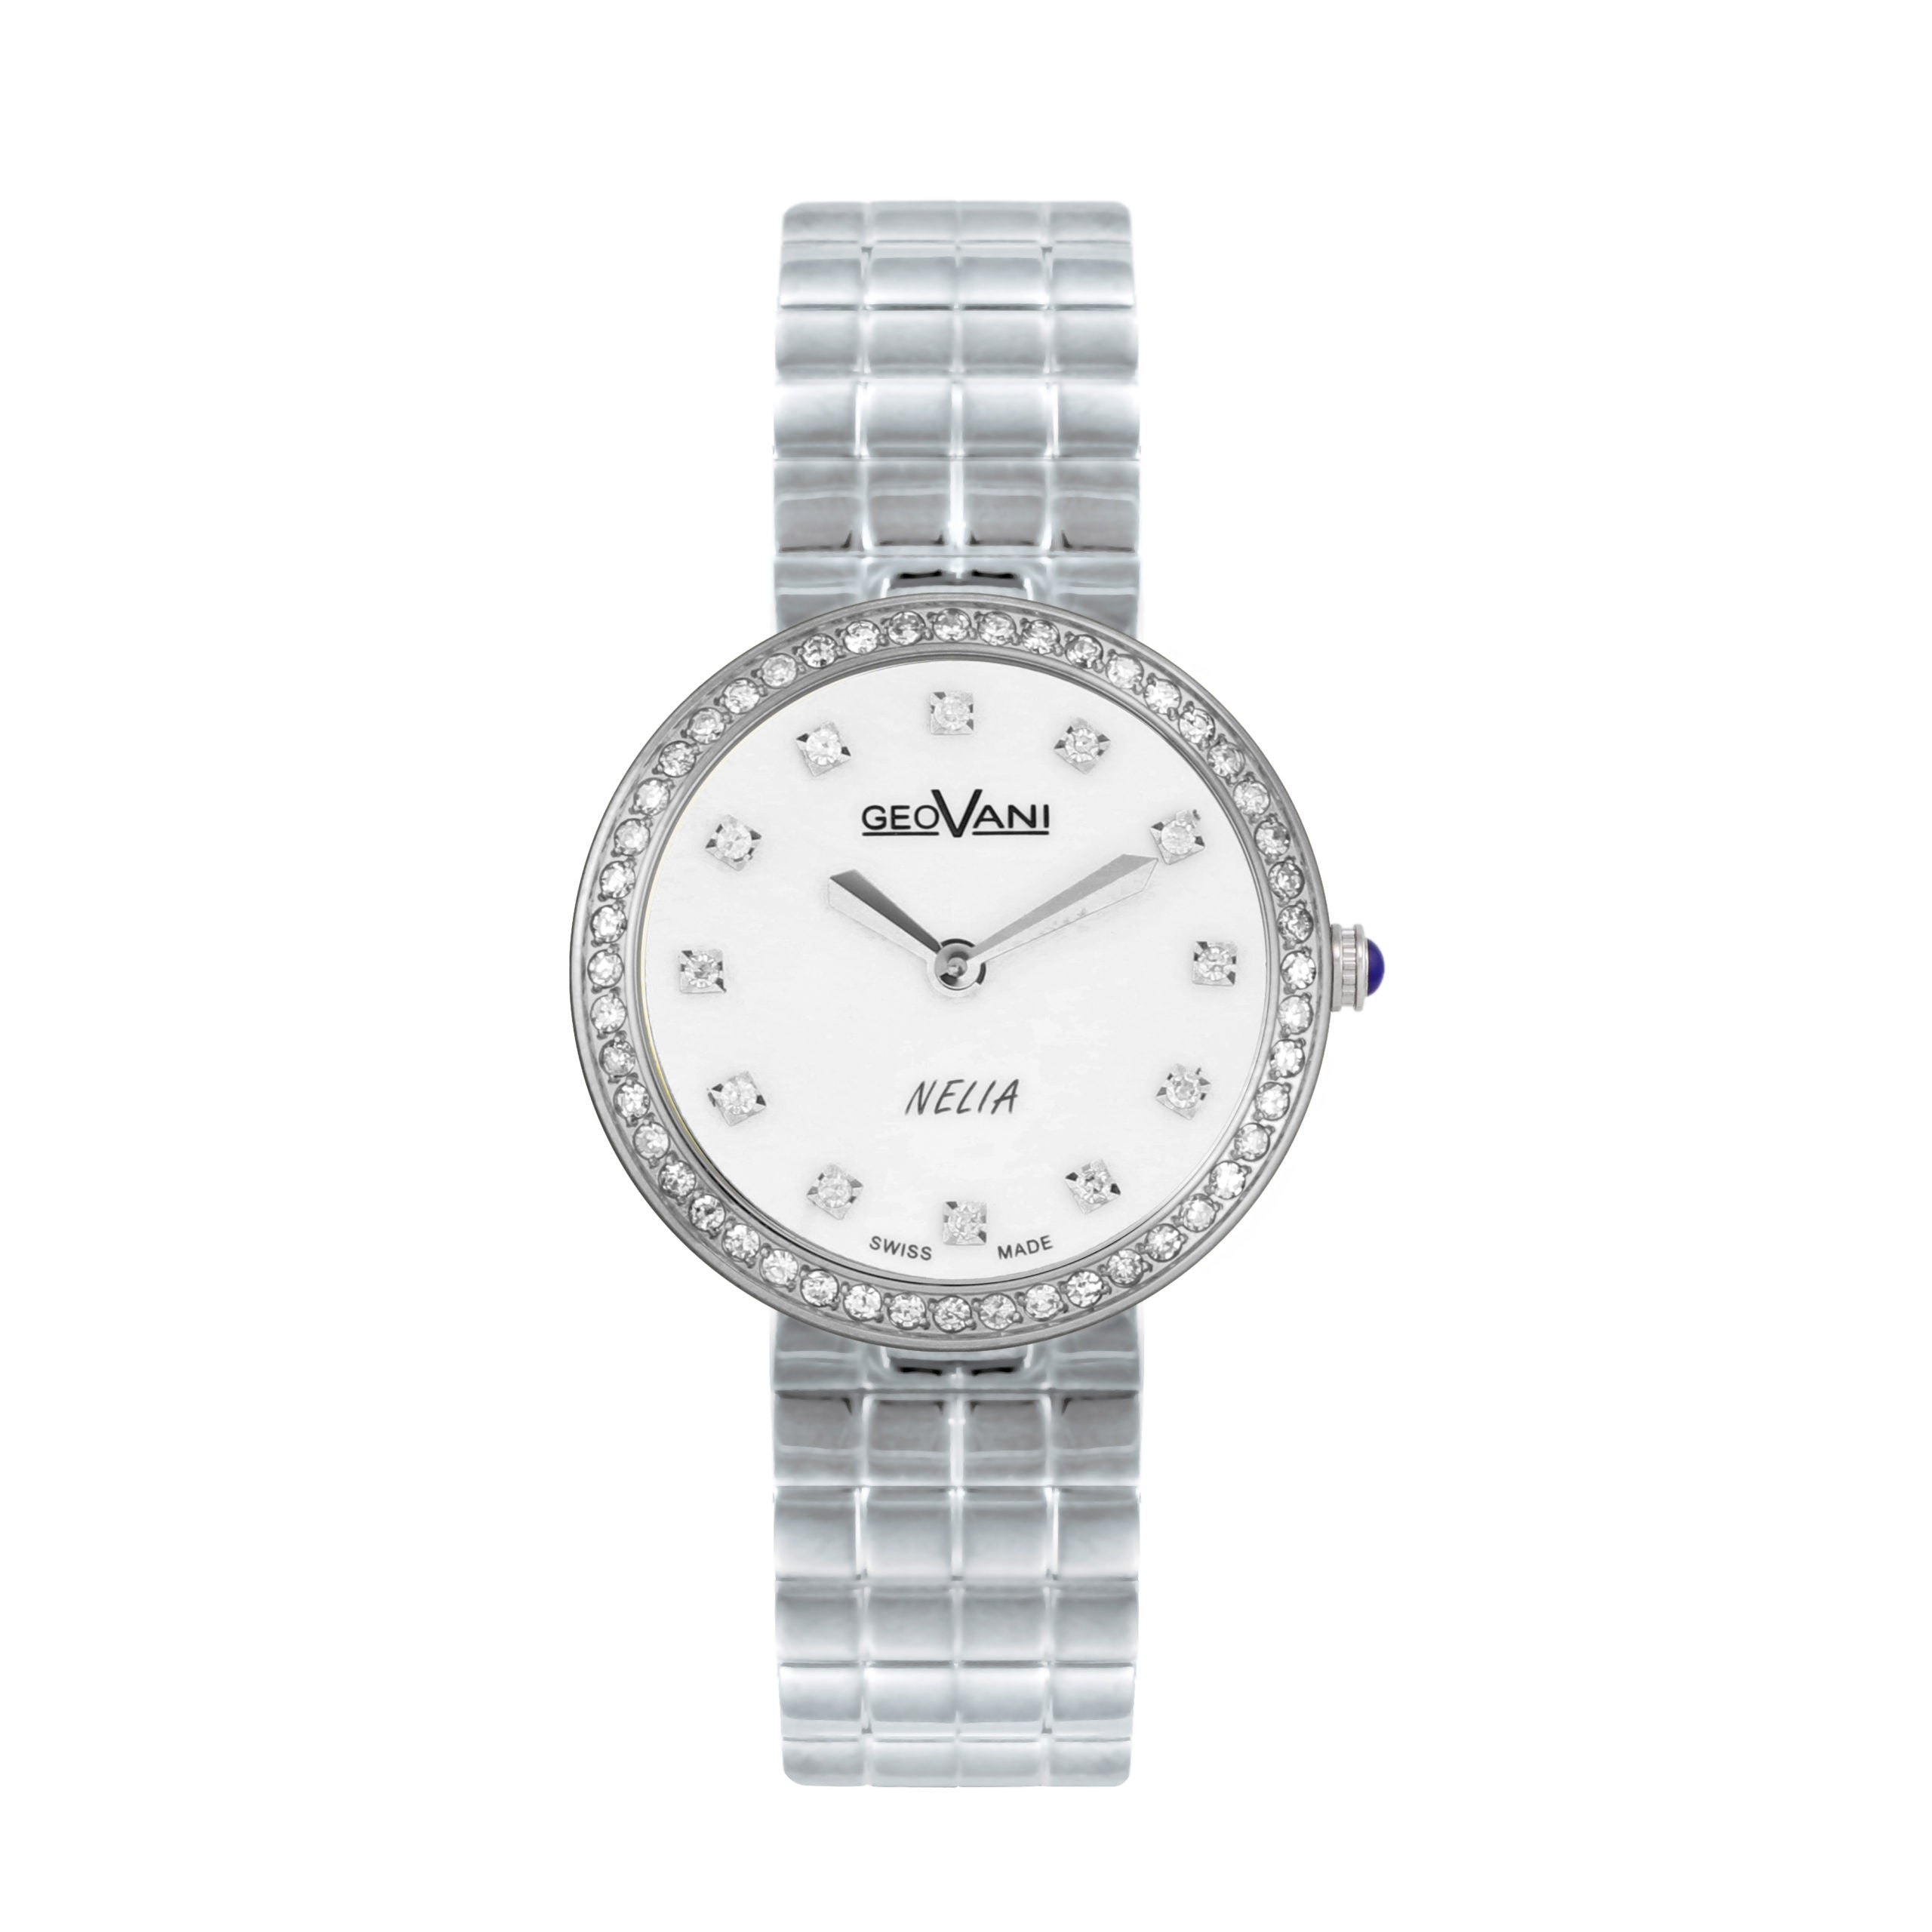 Giovanni Women's Swiss Quartz Watch with Pearly White Dial - GEO-0027